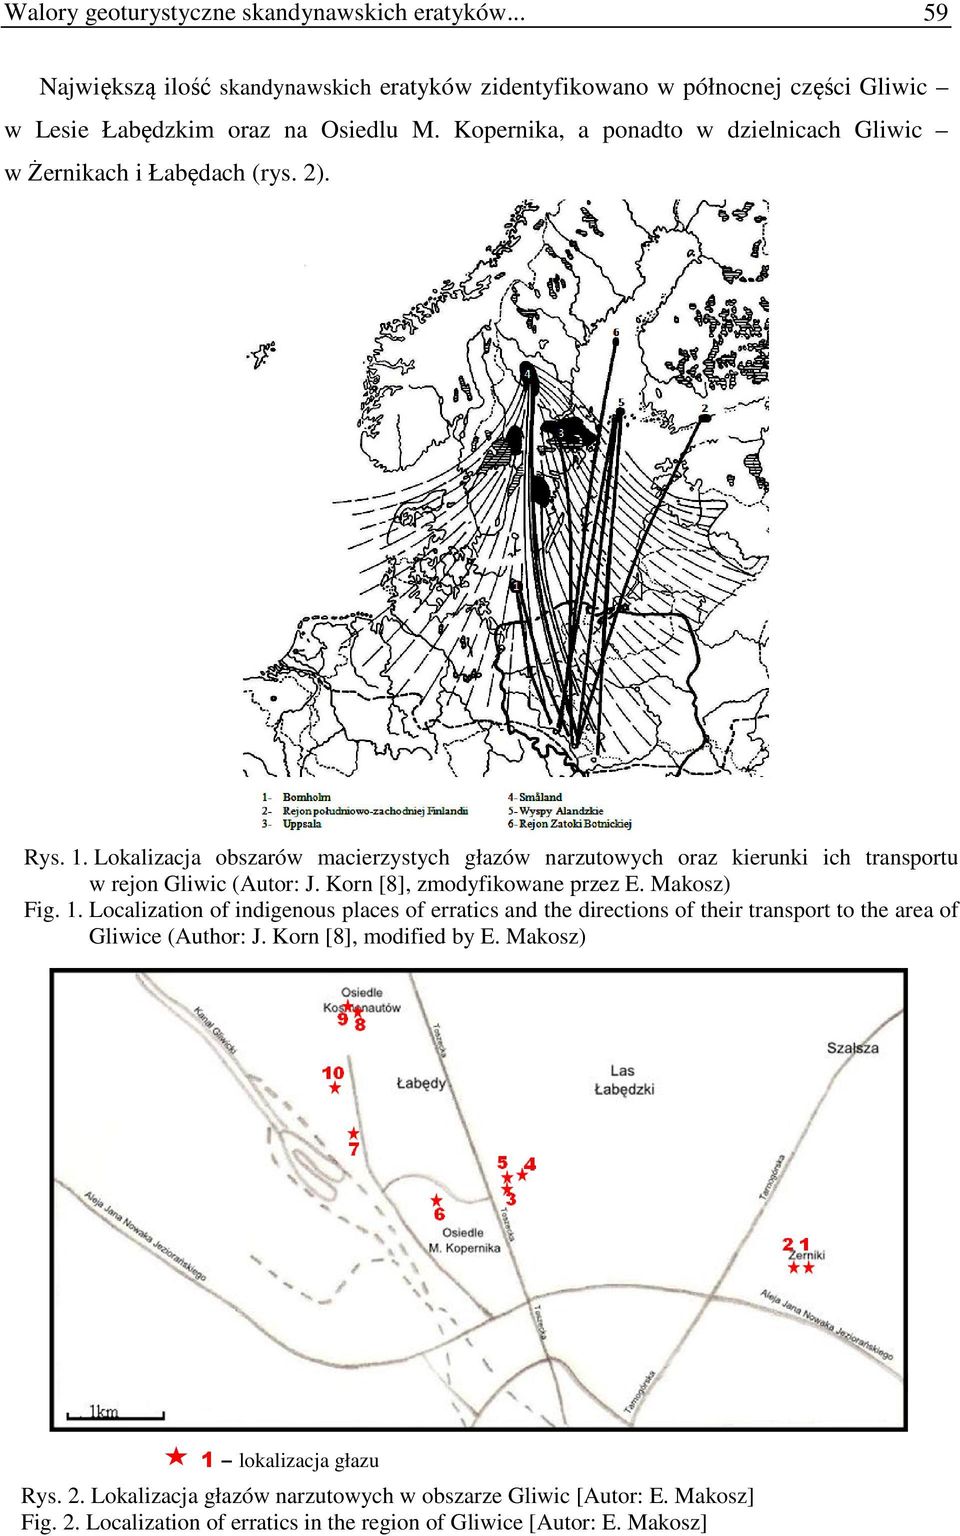 Korn [8], zmodyfikowane przez E. Makosz) Fig. 1. Localization of indigenous places of erratics and the directions of their transport to the area of Gliwice (Author: J.